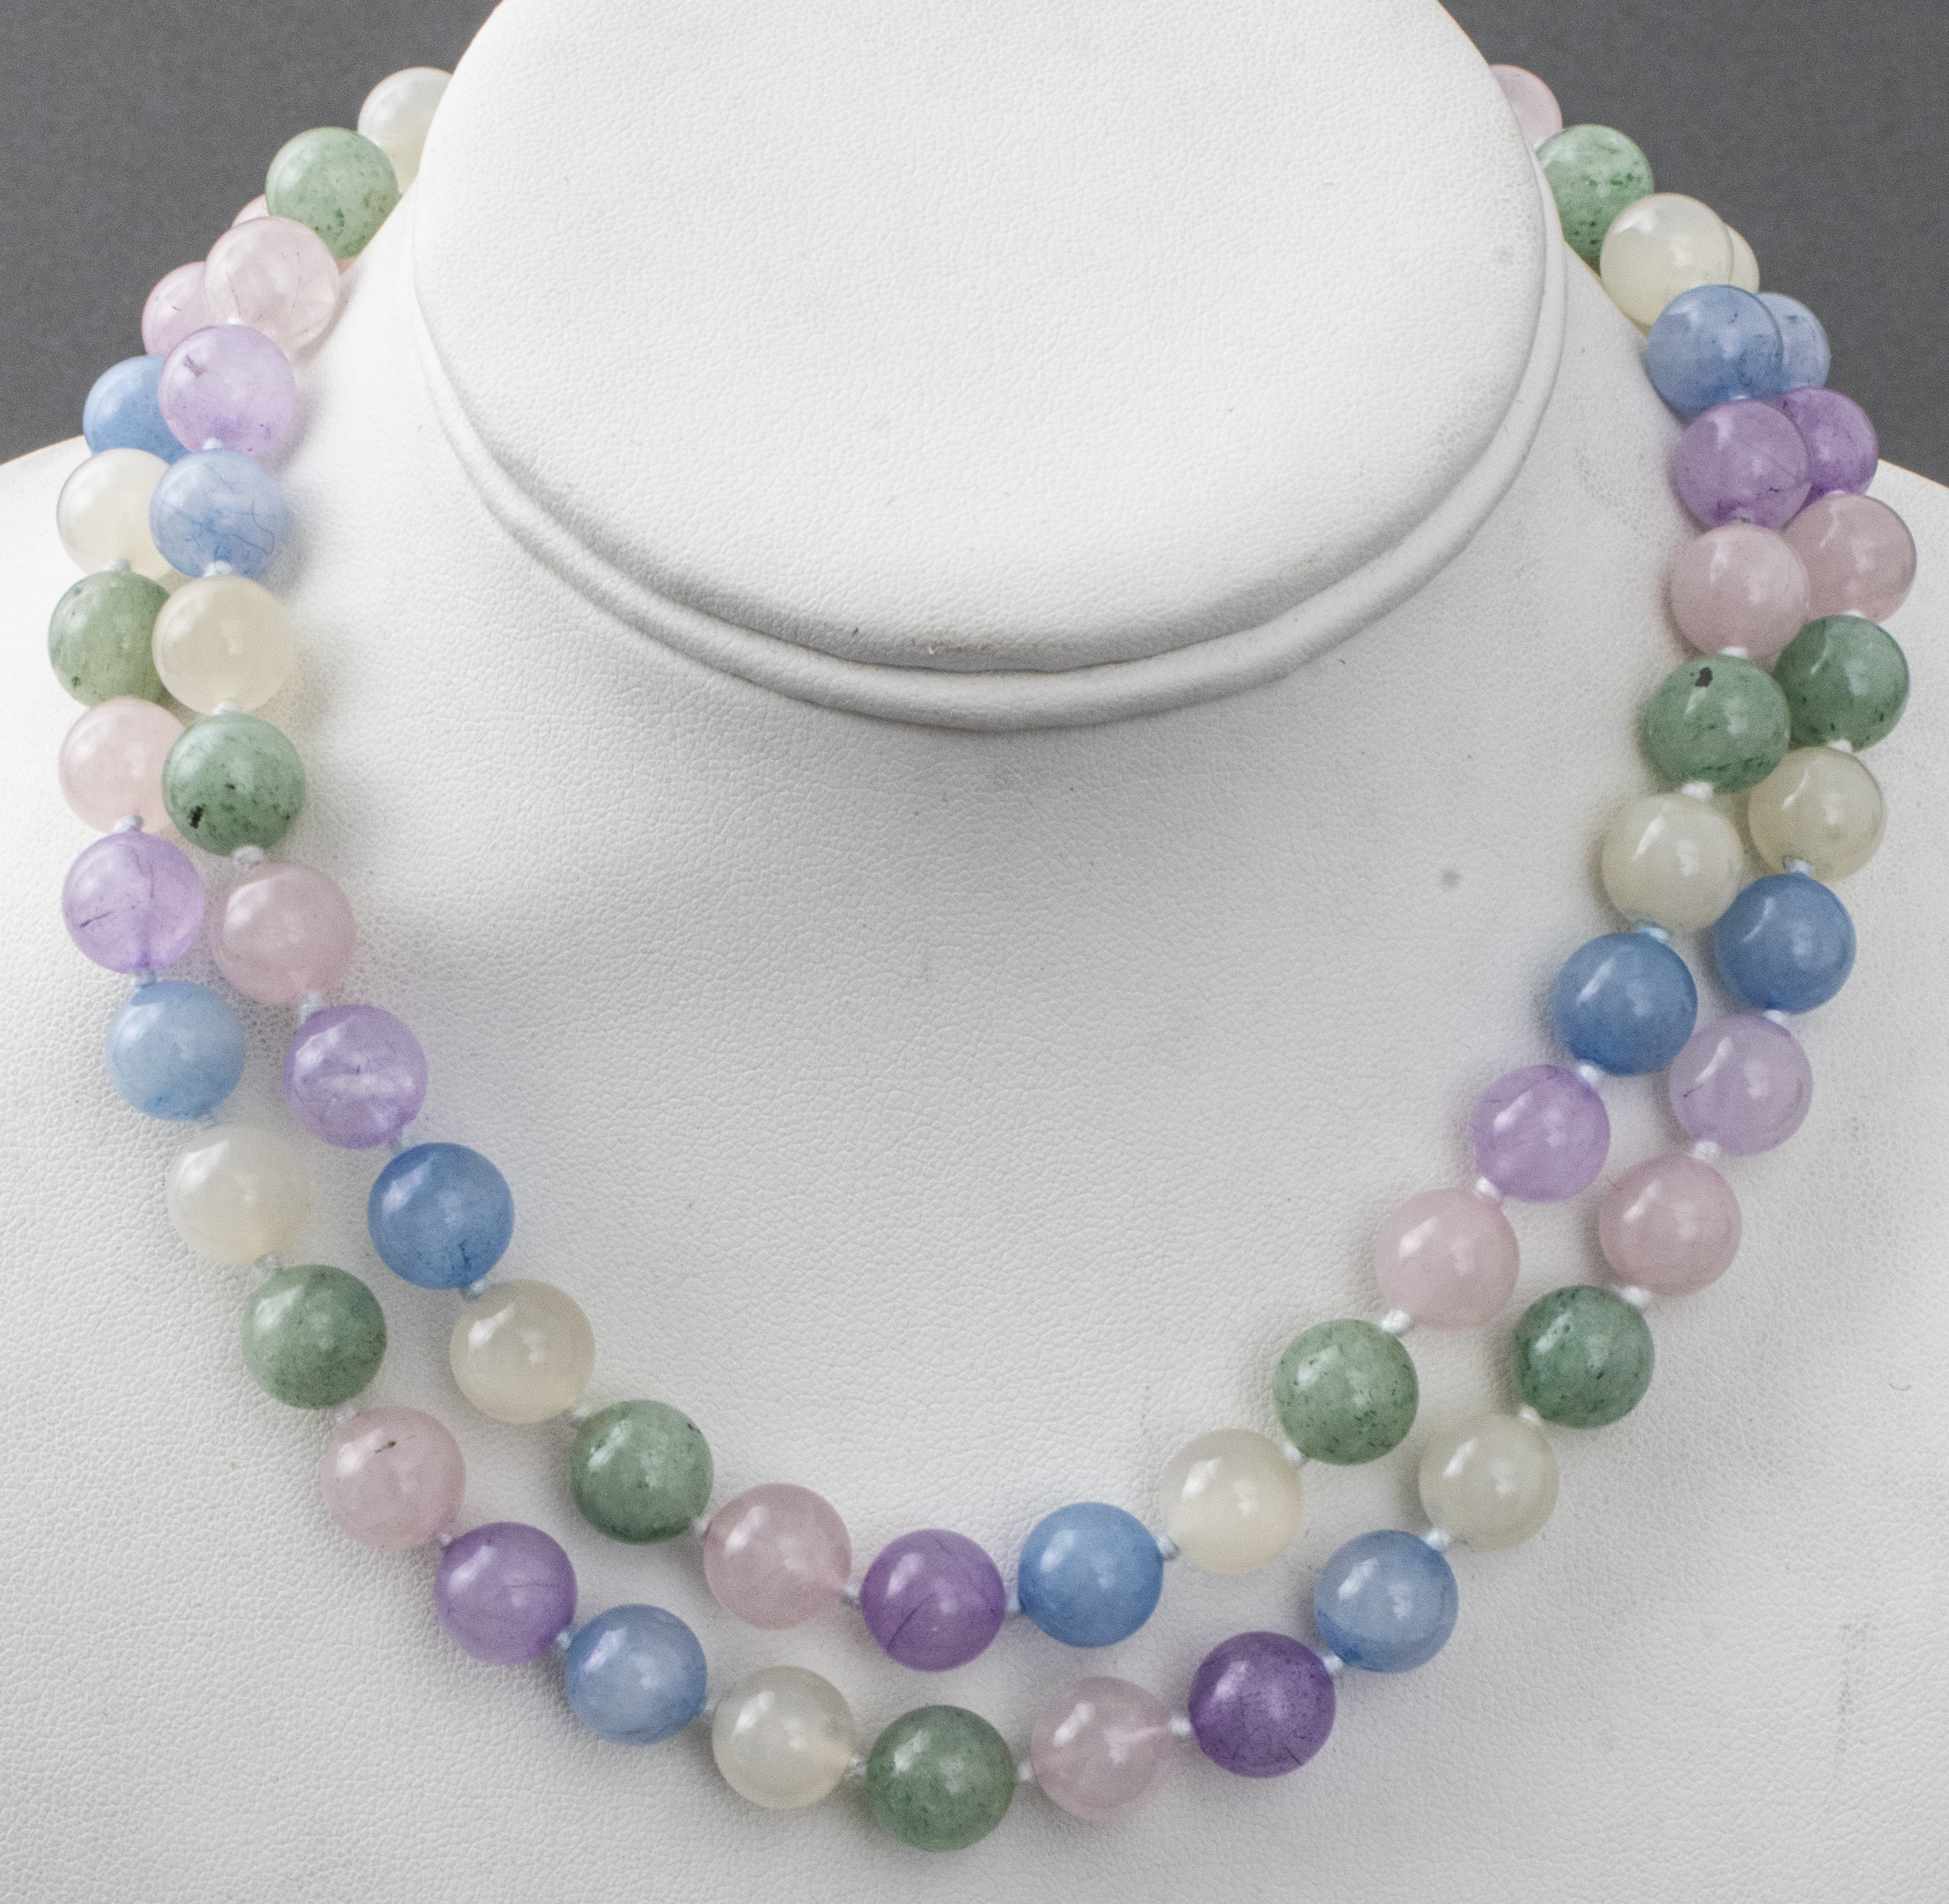 COLORFUL HARDSTONE BEADED NECKLACE 3c4521